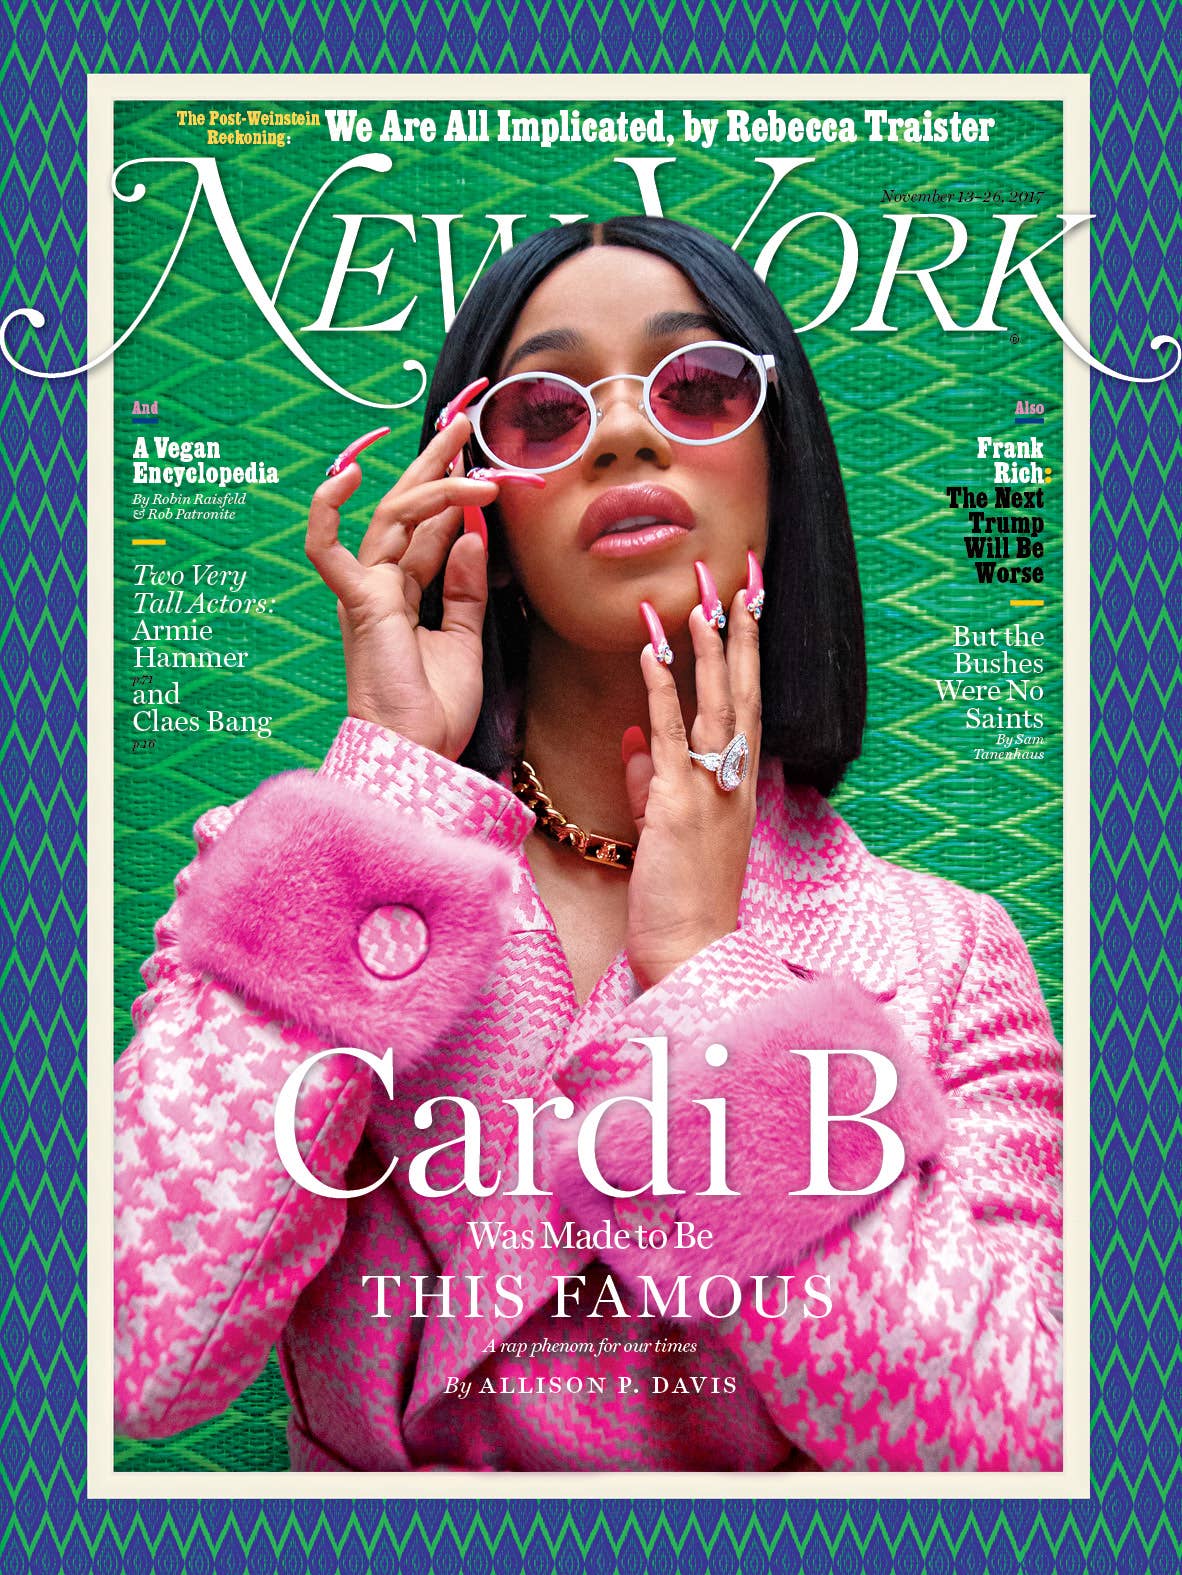 Cardi B on the cover of 'New York Magazine'